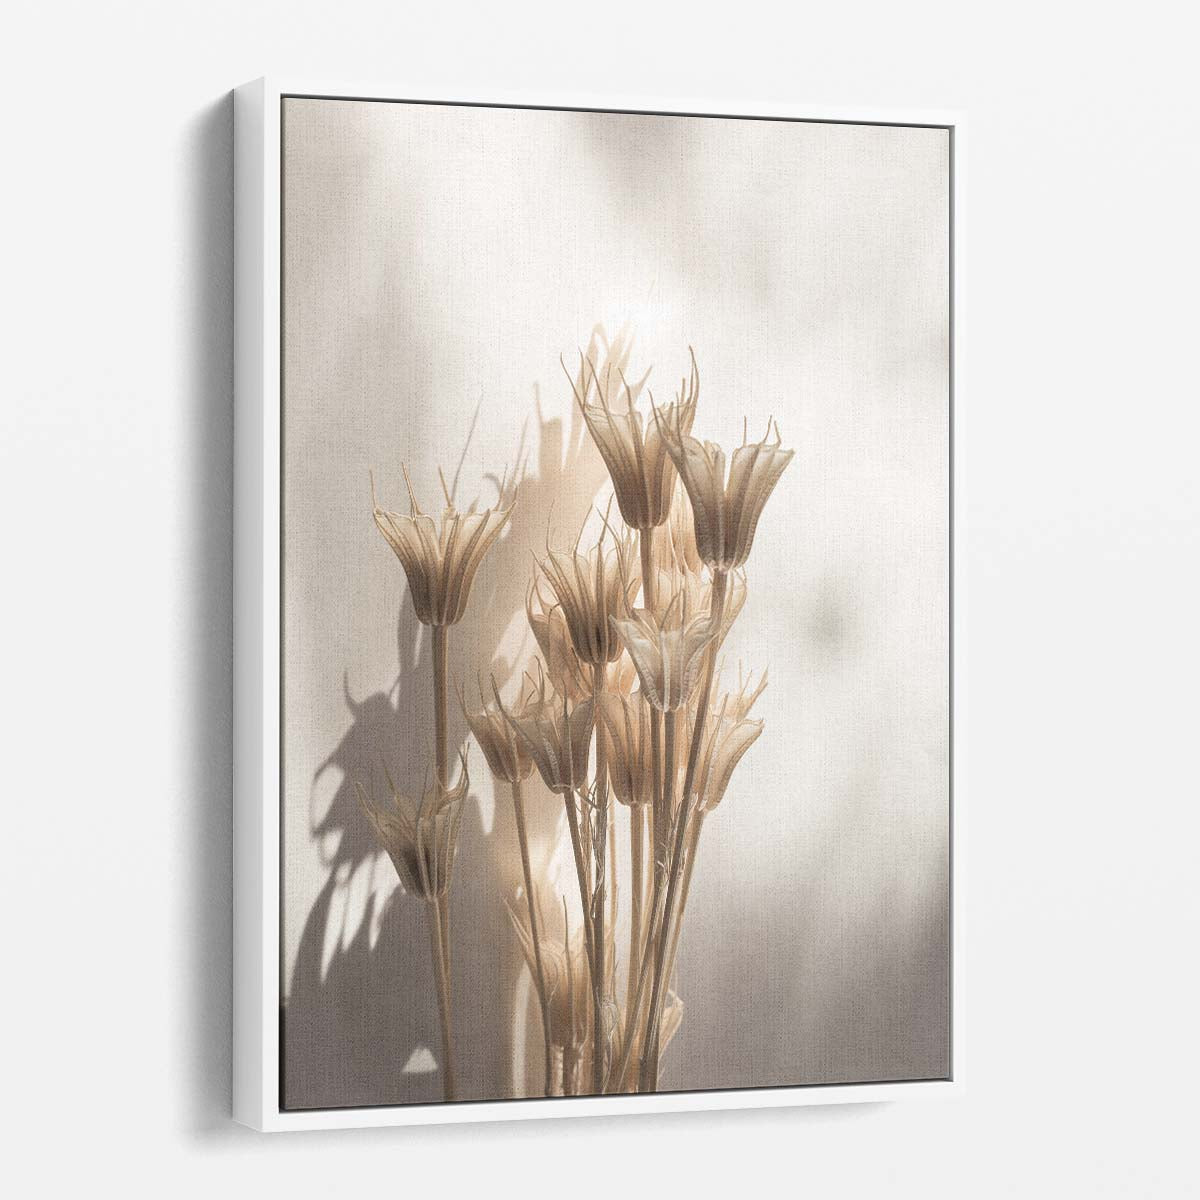 Beige Boho Floral Macro Photography Art, Mareike Bohmer by Luxuriance Designs, made in USA